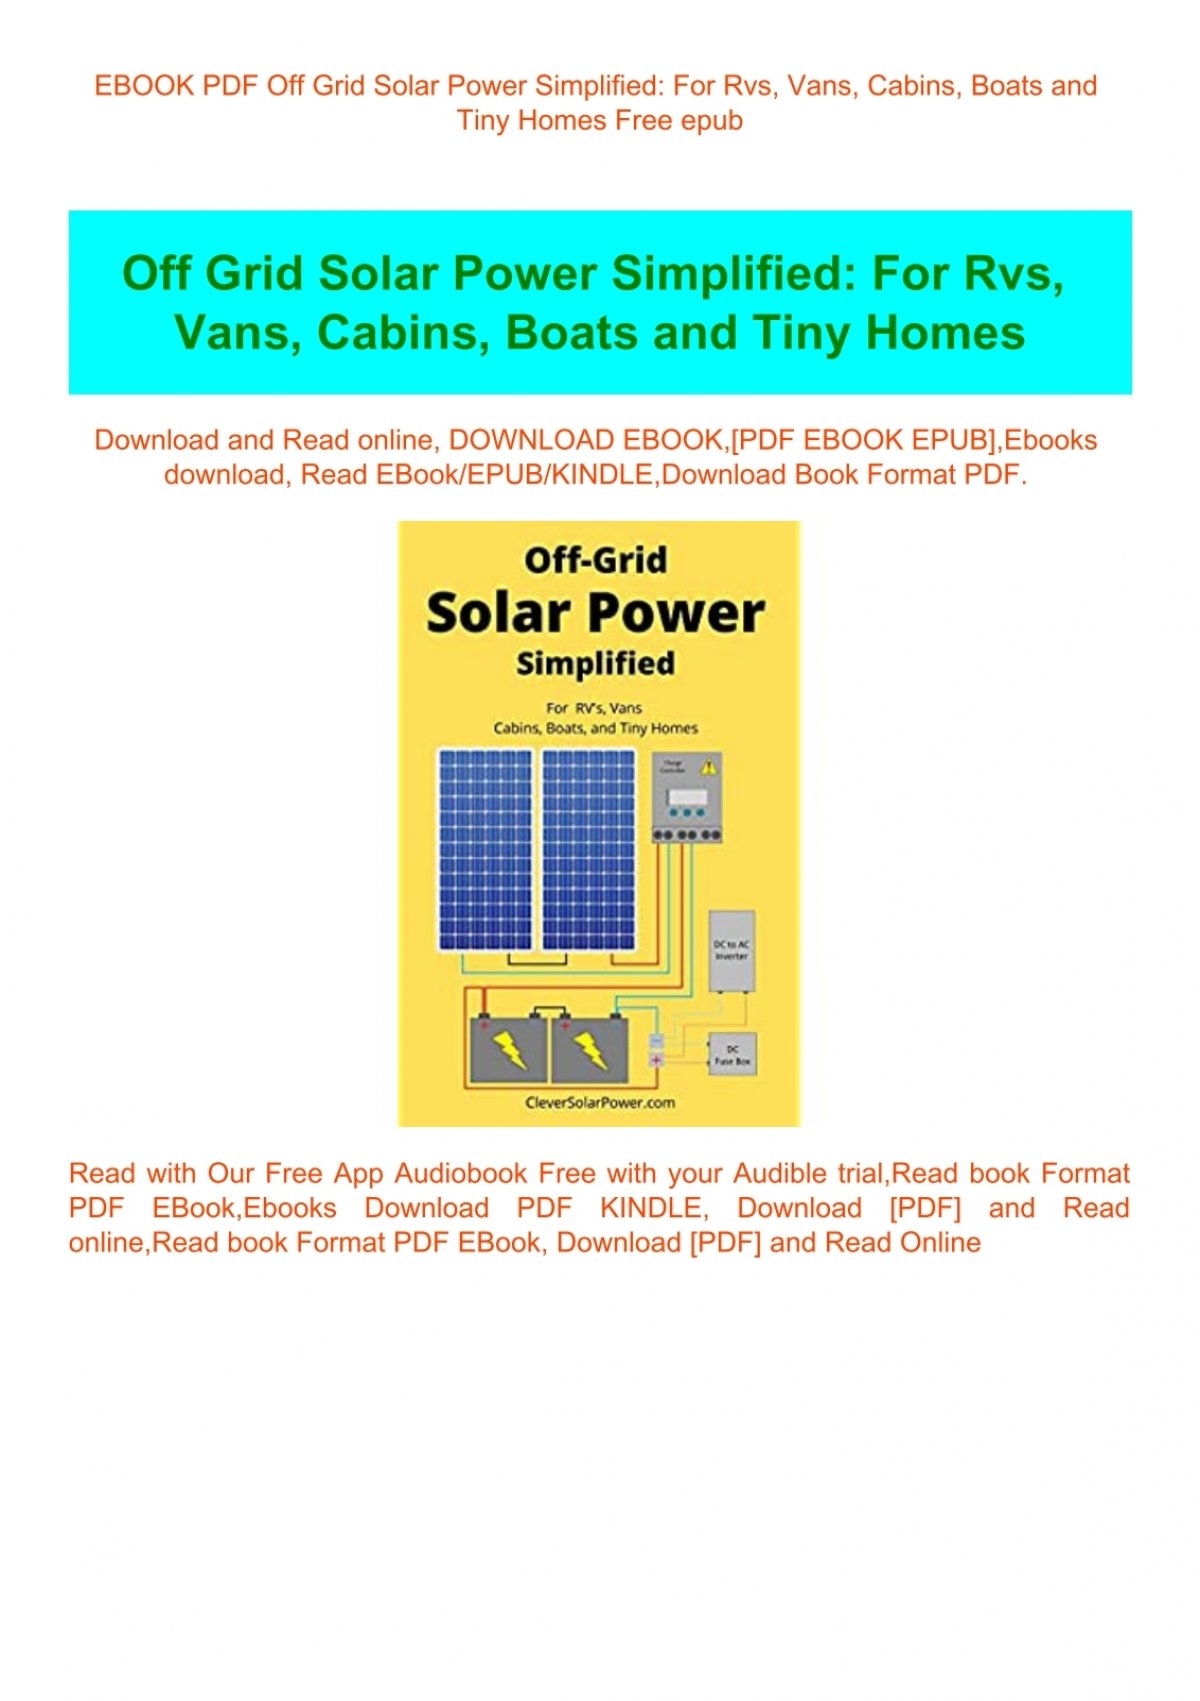 ebook-pdf-off-grid-solar-power-simplified-for-rvs-vans-cabins-boats-and